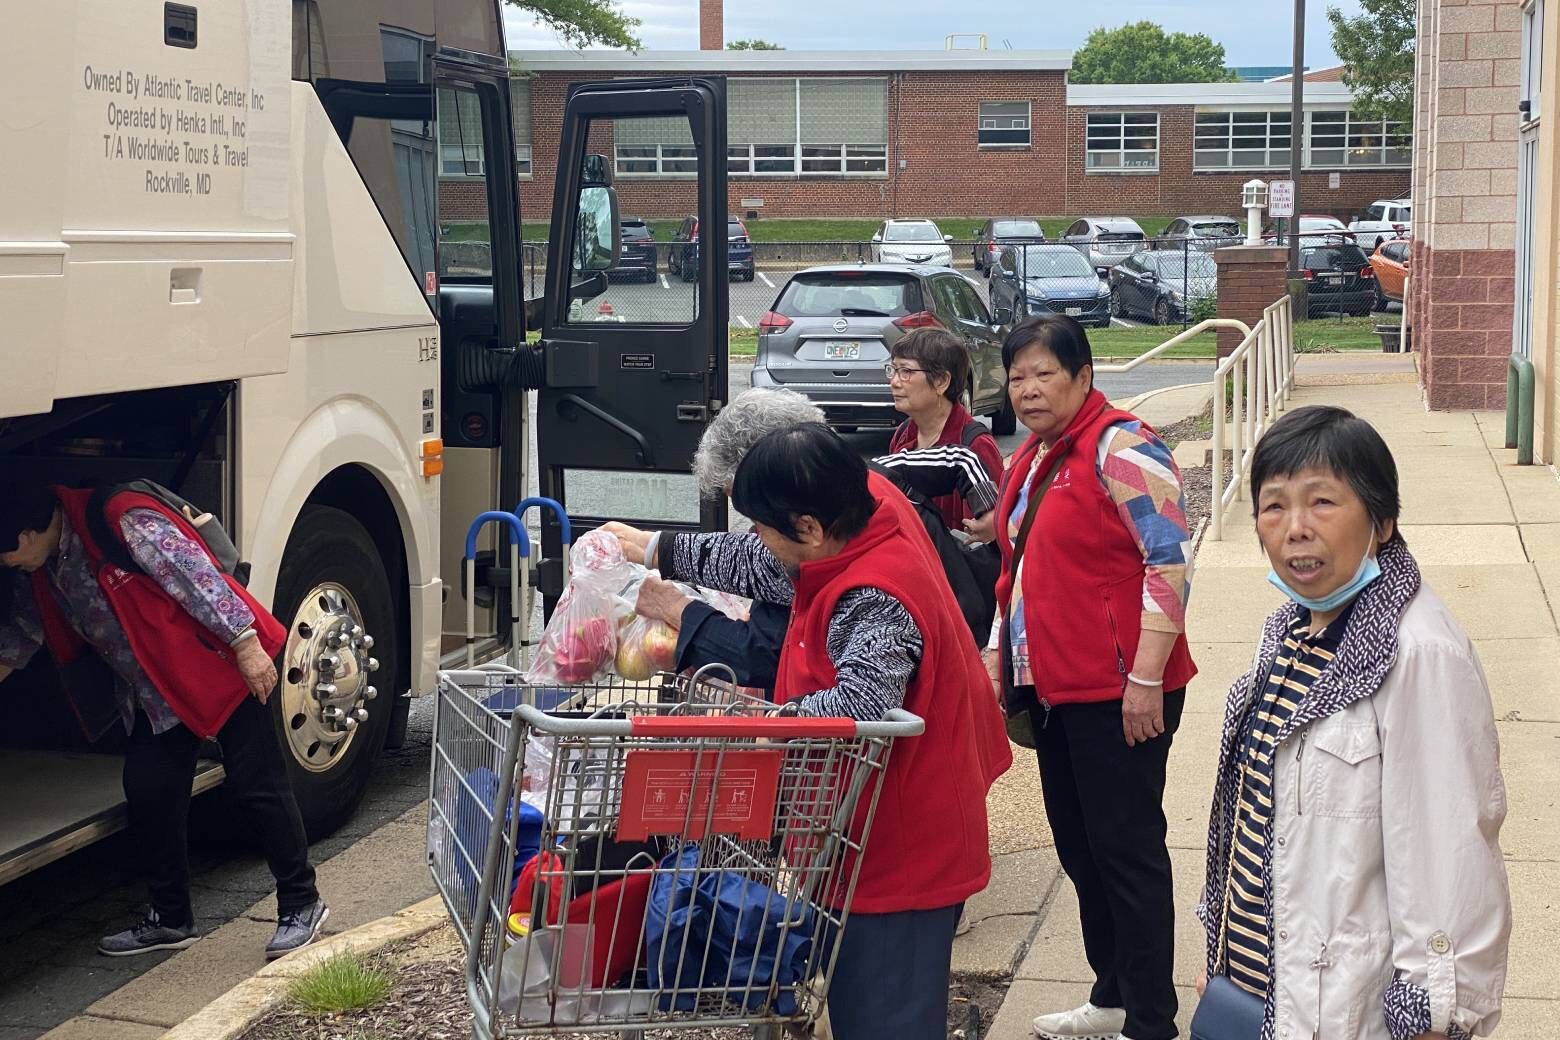 <p>After everyone went through the checkout line at the Great Wall and packed their groceries onto the bus, the group then headed to the Blue Pearl Chinese buffet in Springfield, Virginia.</p>
<p>When asked what the buffet&#8217;s best dish is, SIU Mon Tam told WTOP to make sure to get the fried fish and rice noodles.</p>
<p>&nbsp;</p>
